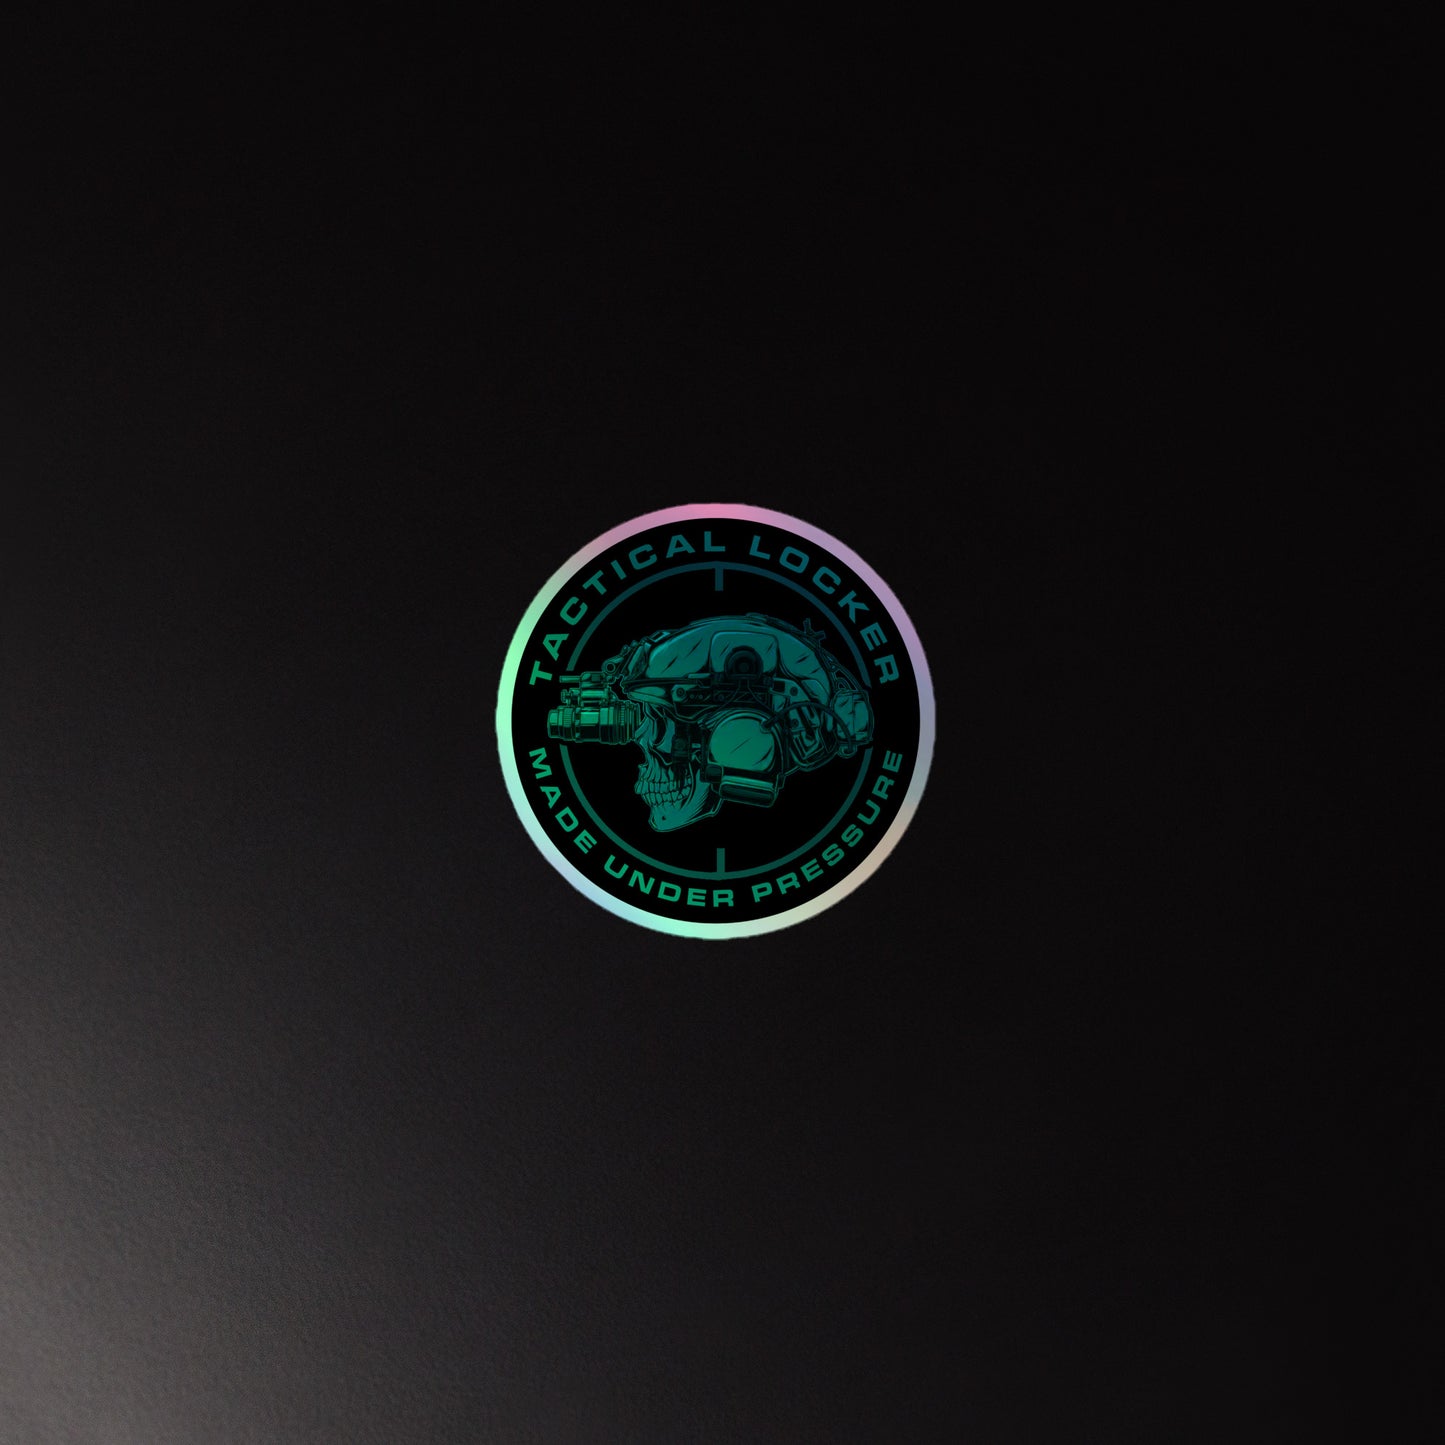 Tactical Locker OPS Holographic stickers